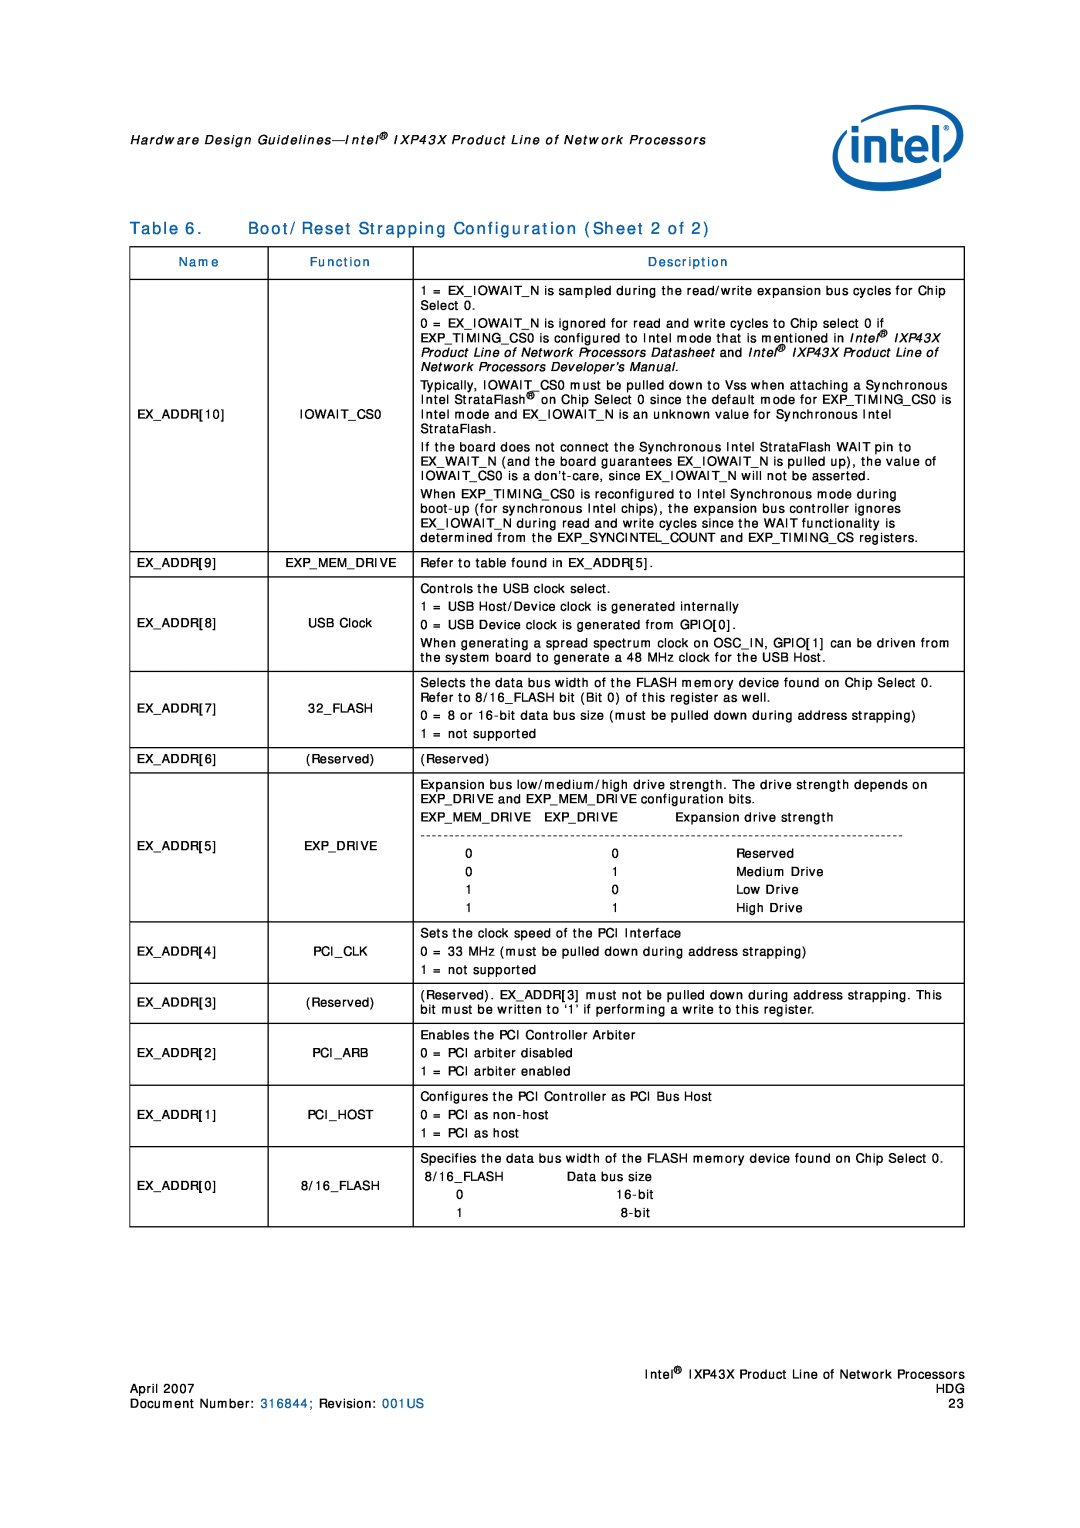 Intel IXP43X manual Boot/Reset Strapping Configuration Sheet 2 of, Network Processors Developer’s Manual 